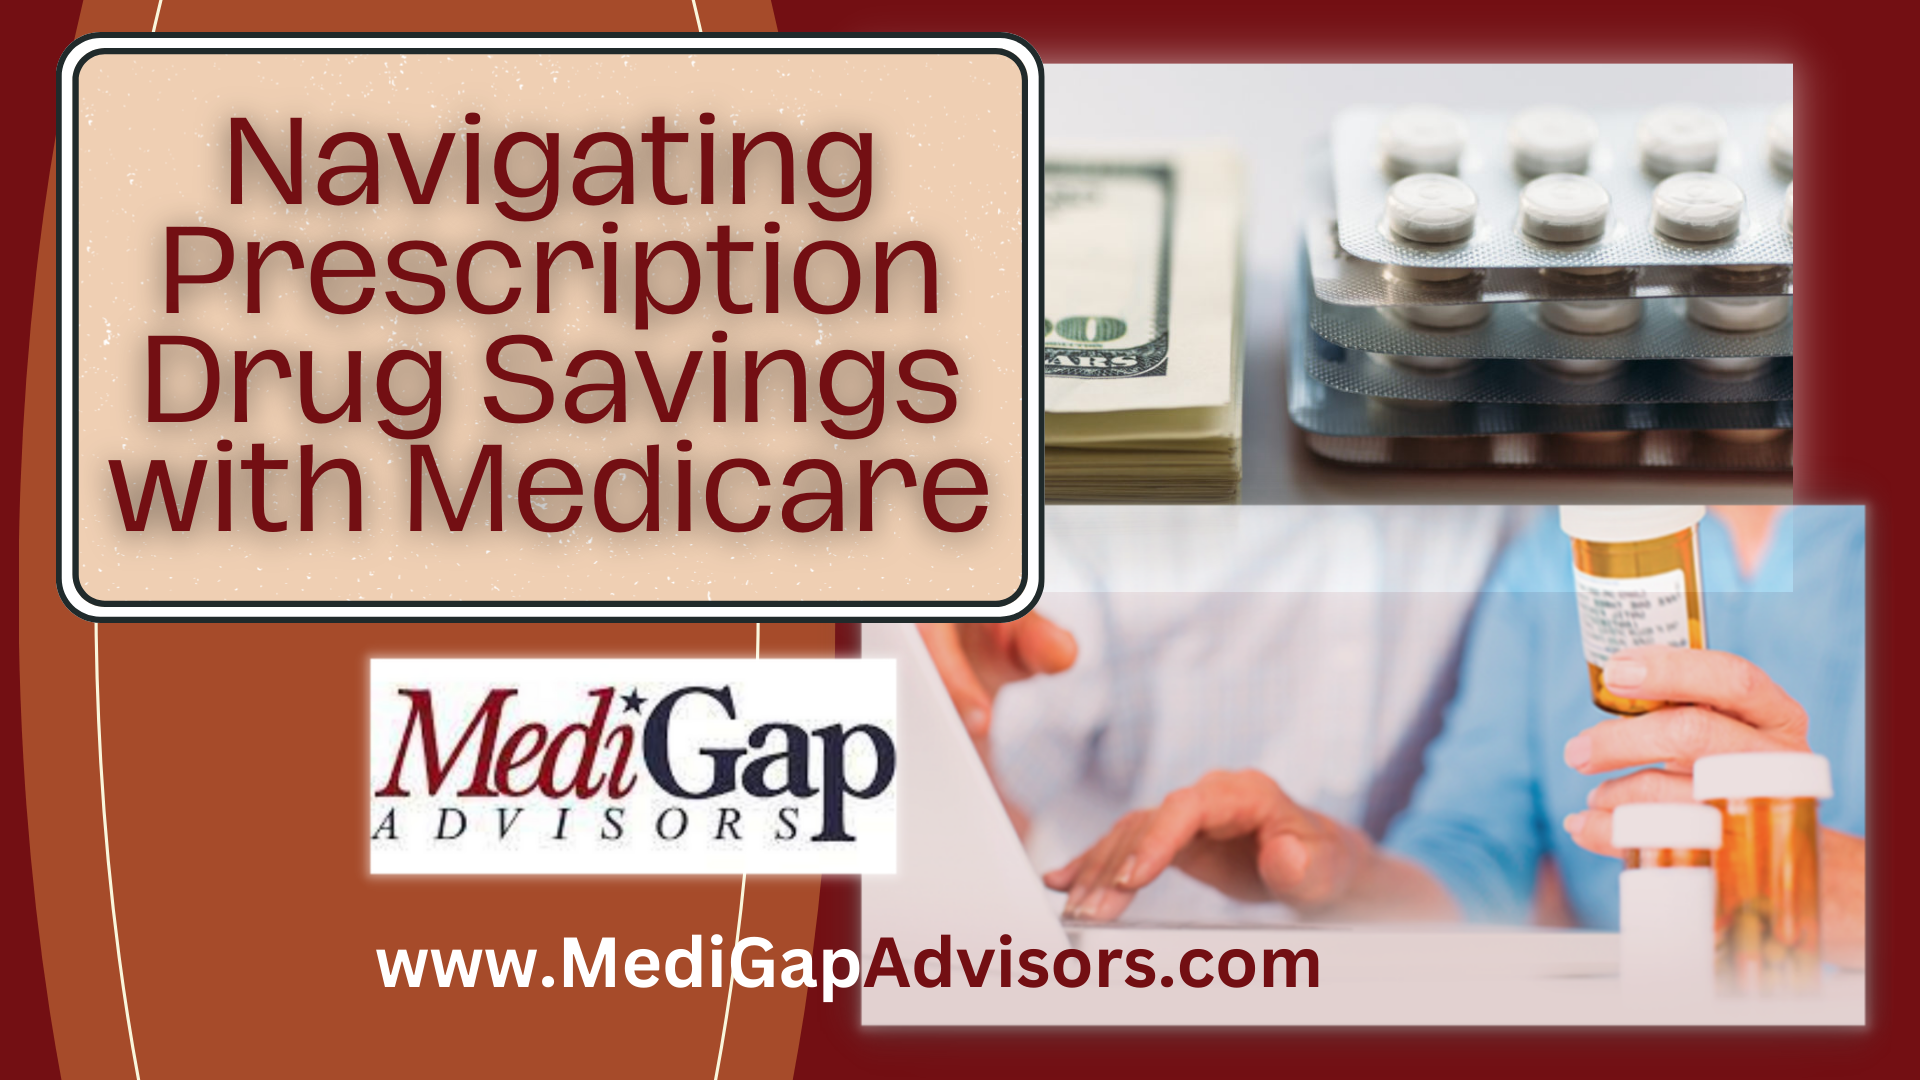 Does Medicare Cover for Non-Working Spouses